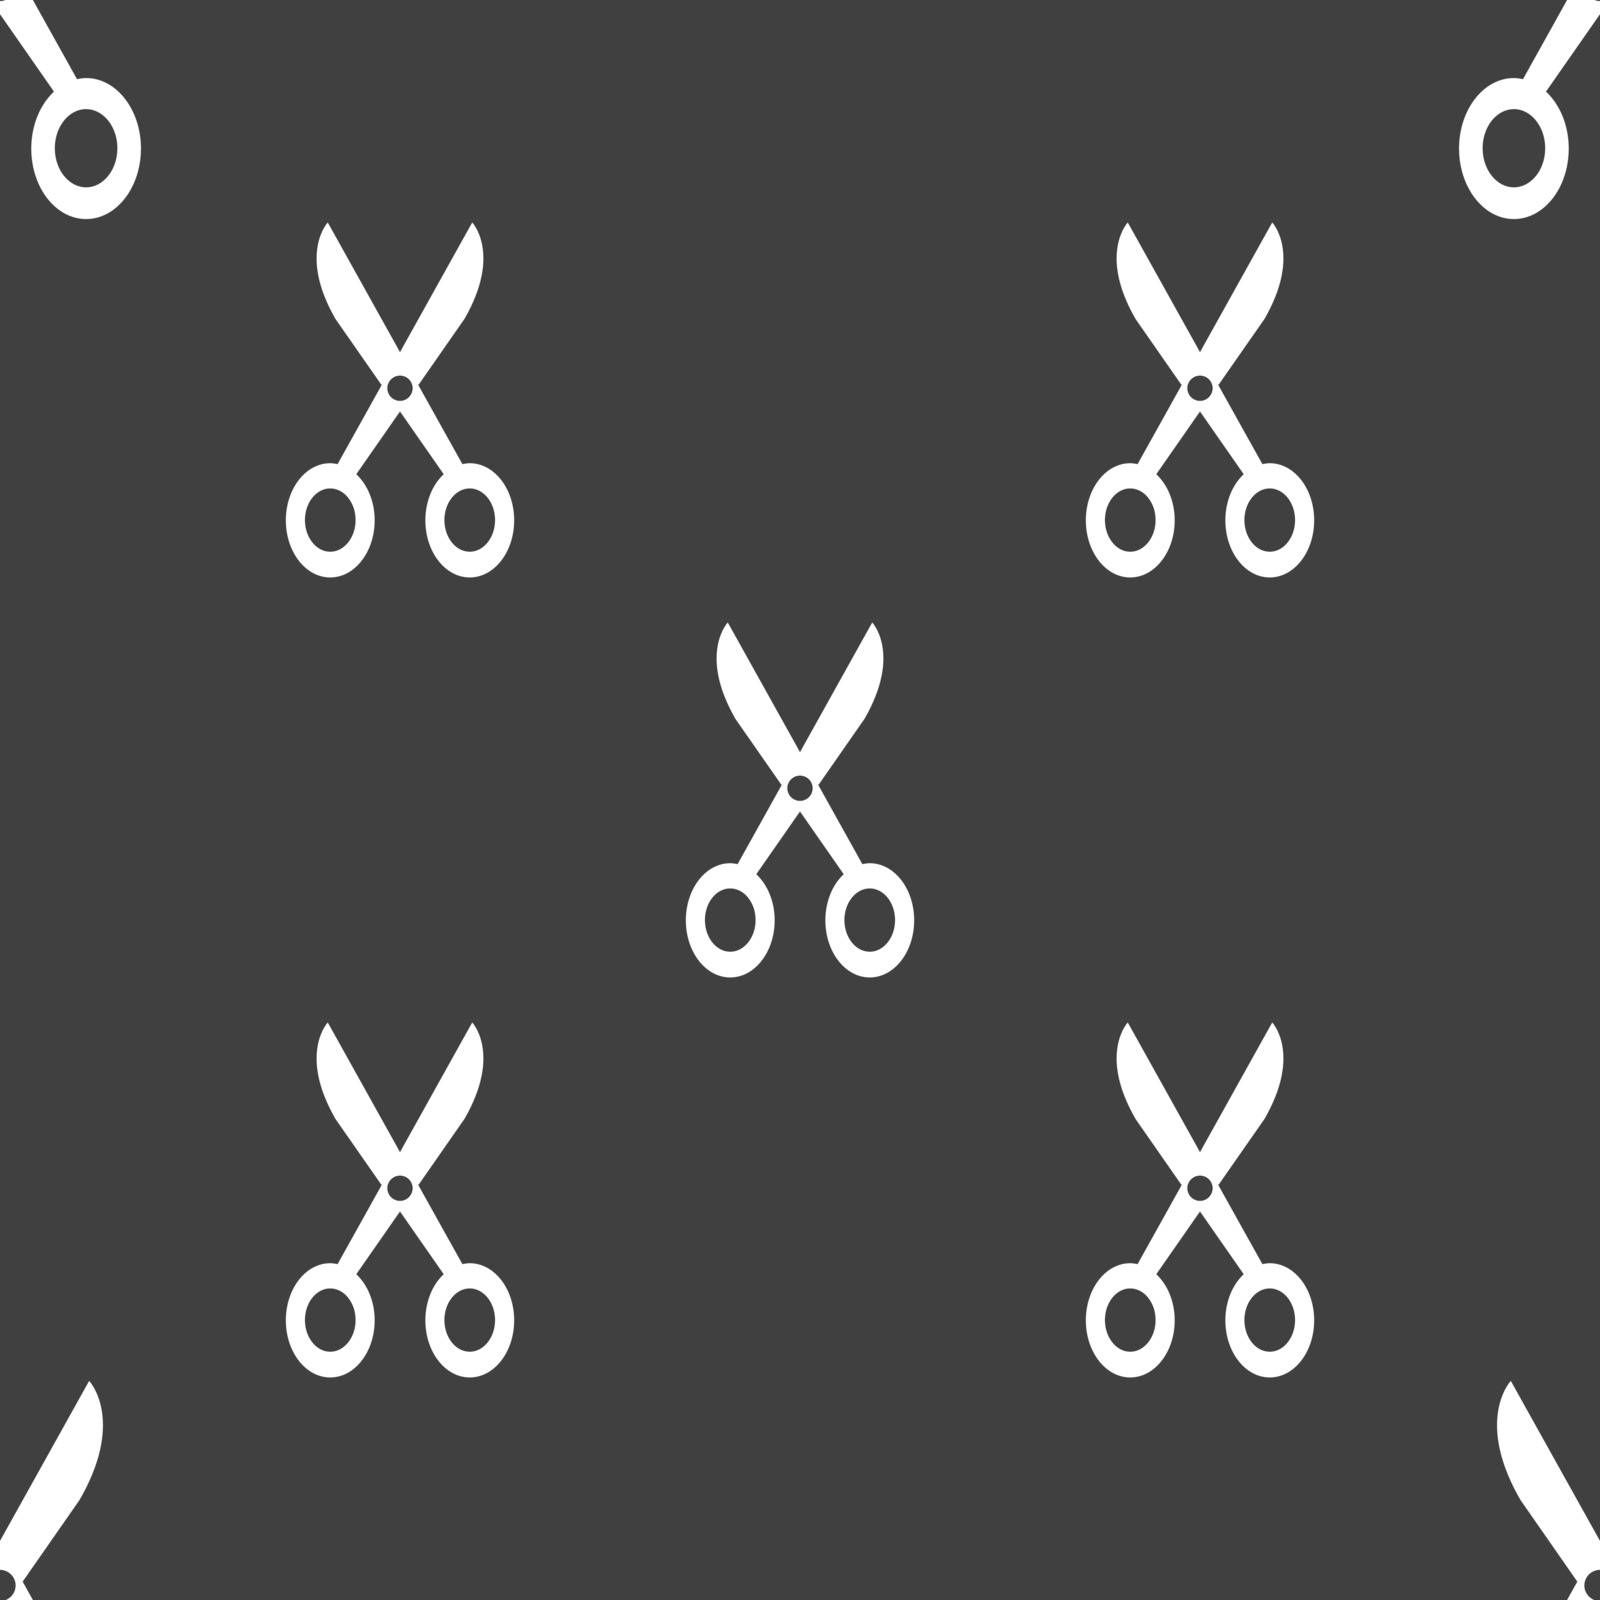 Scissors icon sign. Seamless pattern on a gray background. Vector illustration